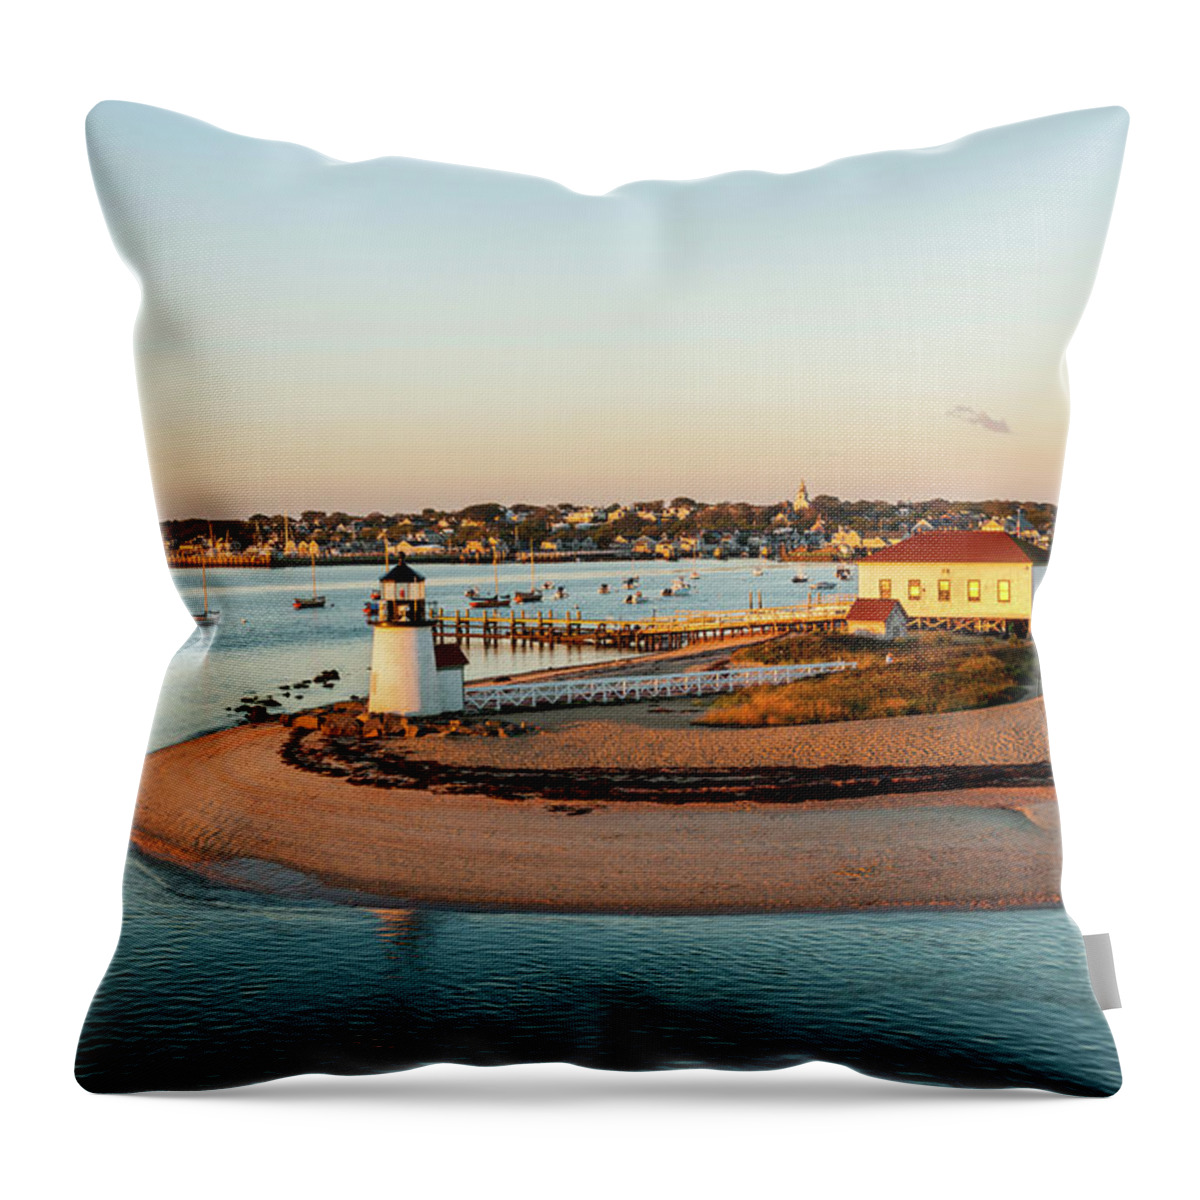 Estock Throw Pillow featuring the digital art Lighthouse On The Beach #2 by Guido Cozzi